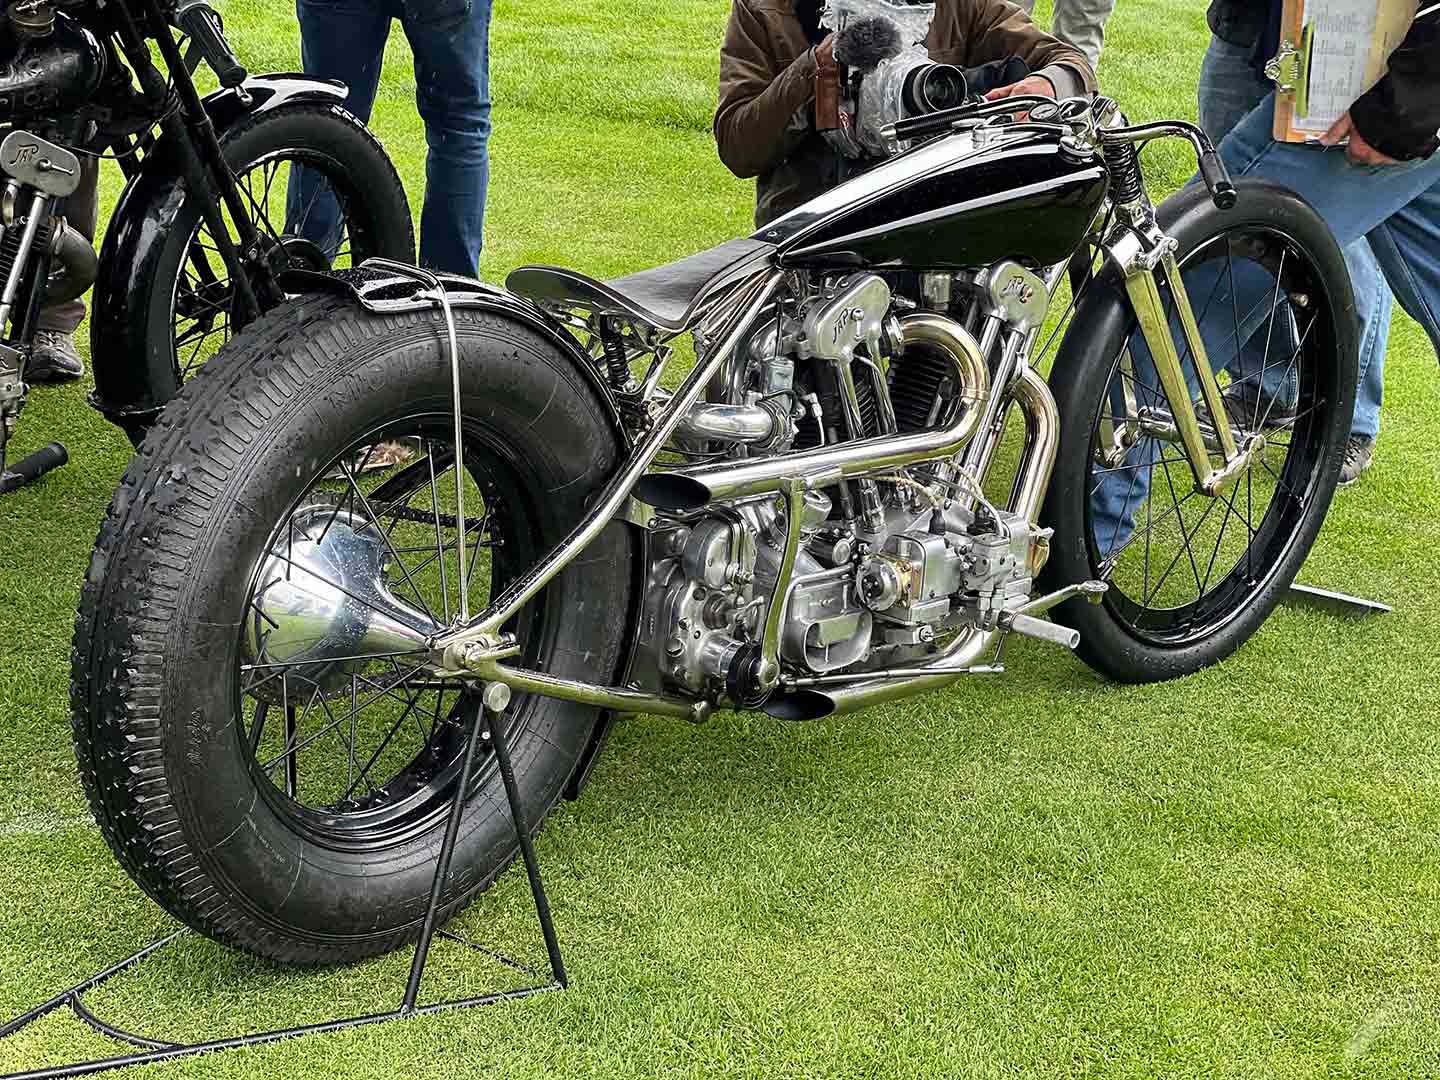 Another of Max Hazan’s otherworldly creations, this Jap 1000-based build snagged the second place trophy in the Custom/Modified category. We bet owner Jason Mamoa is stoked.